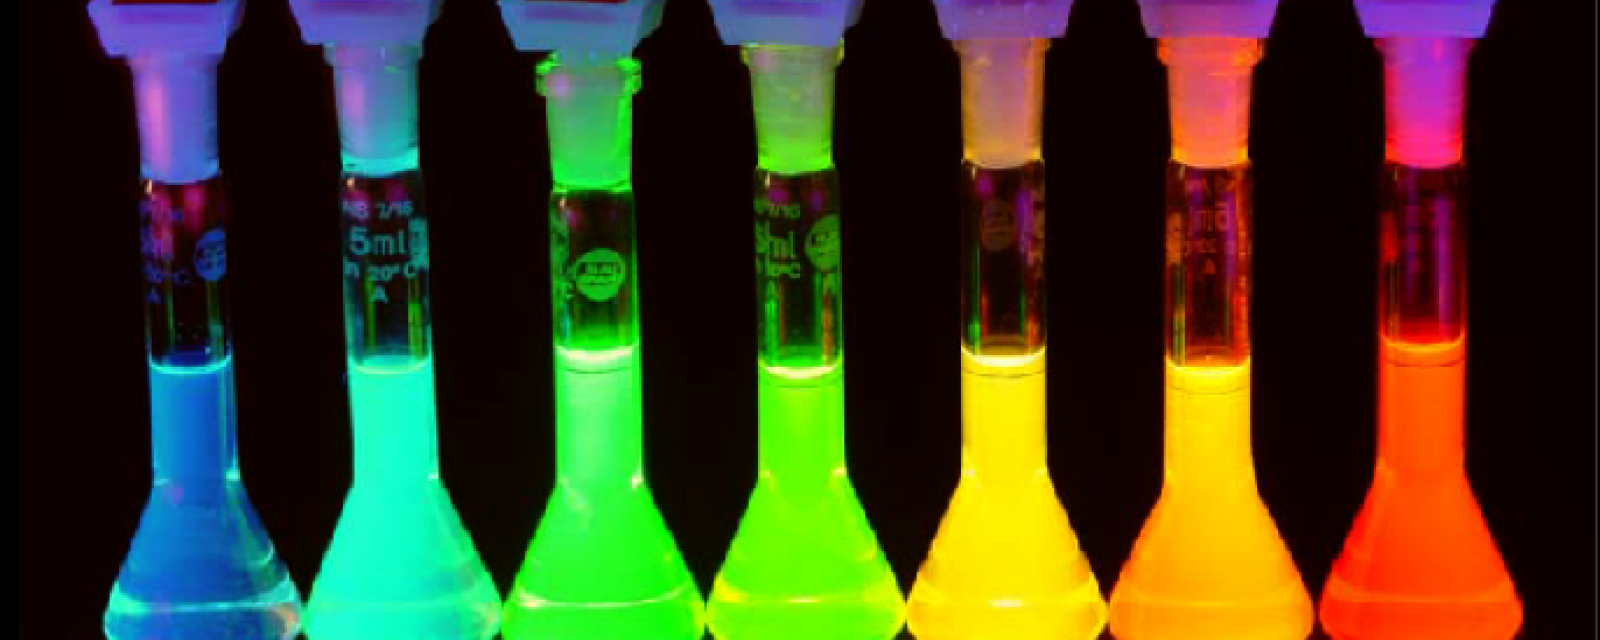 7 vials filled with quantum dots which are lit up and emit colored light